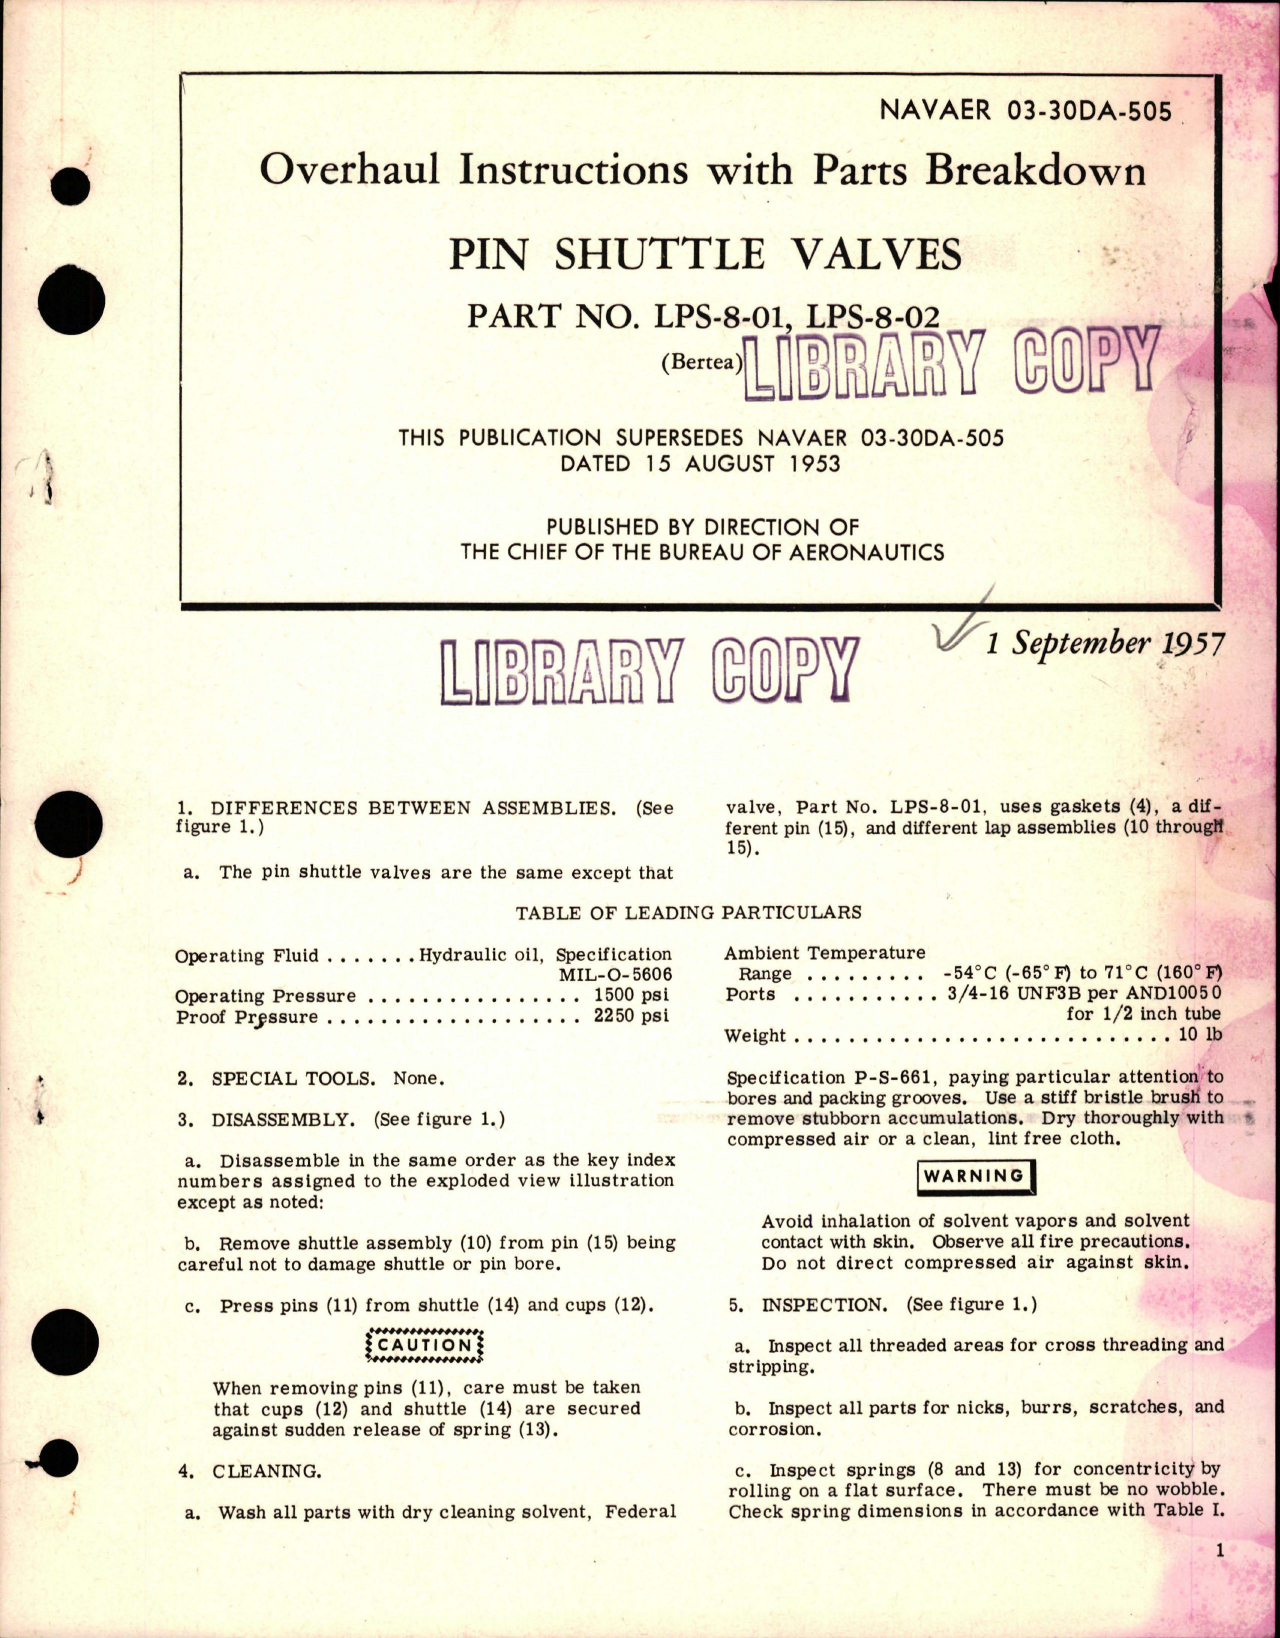 Sample page 1 from AirCorps Library document: Overhaul Instructions with Parts Breakdown for Pin Shuttle Valves - Parts LPS-8-01 and LPS-8-02 